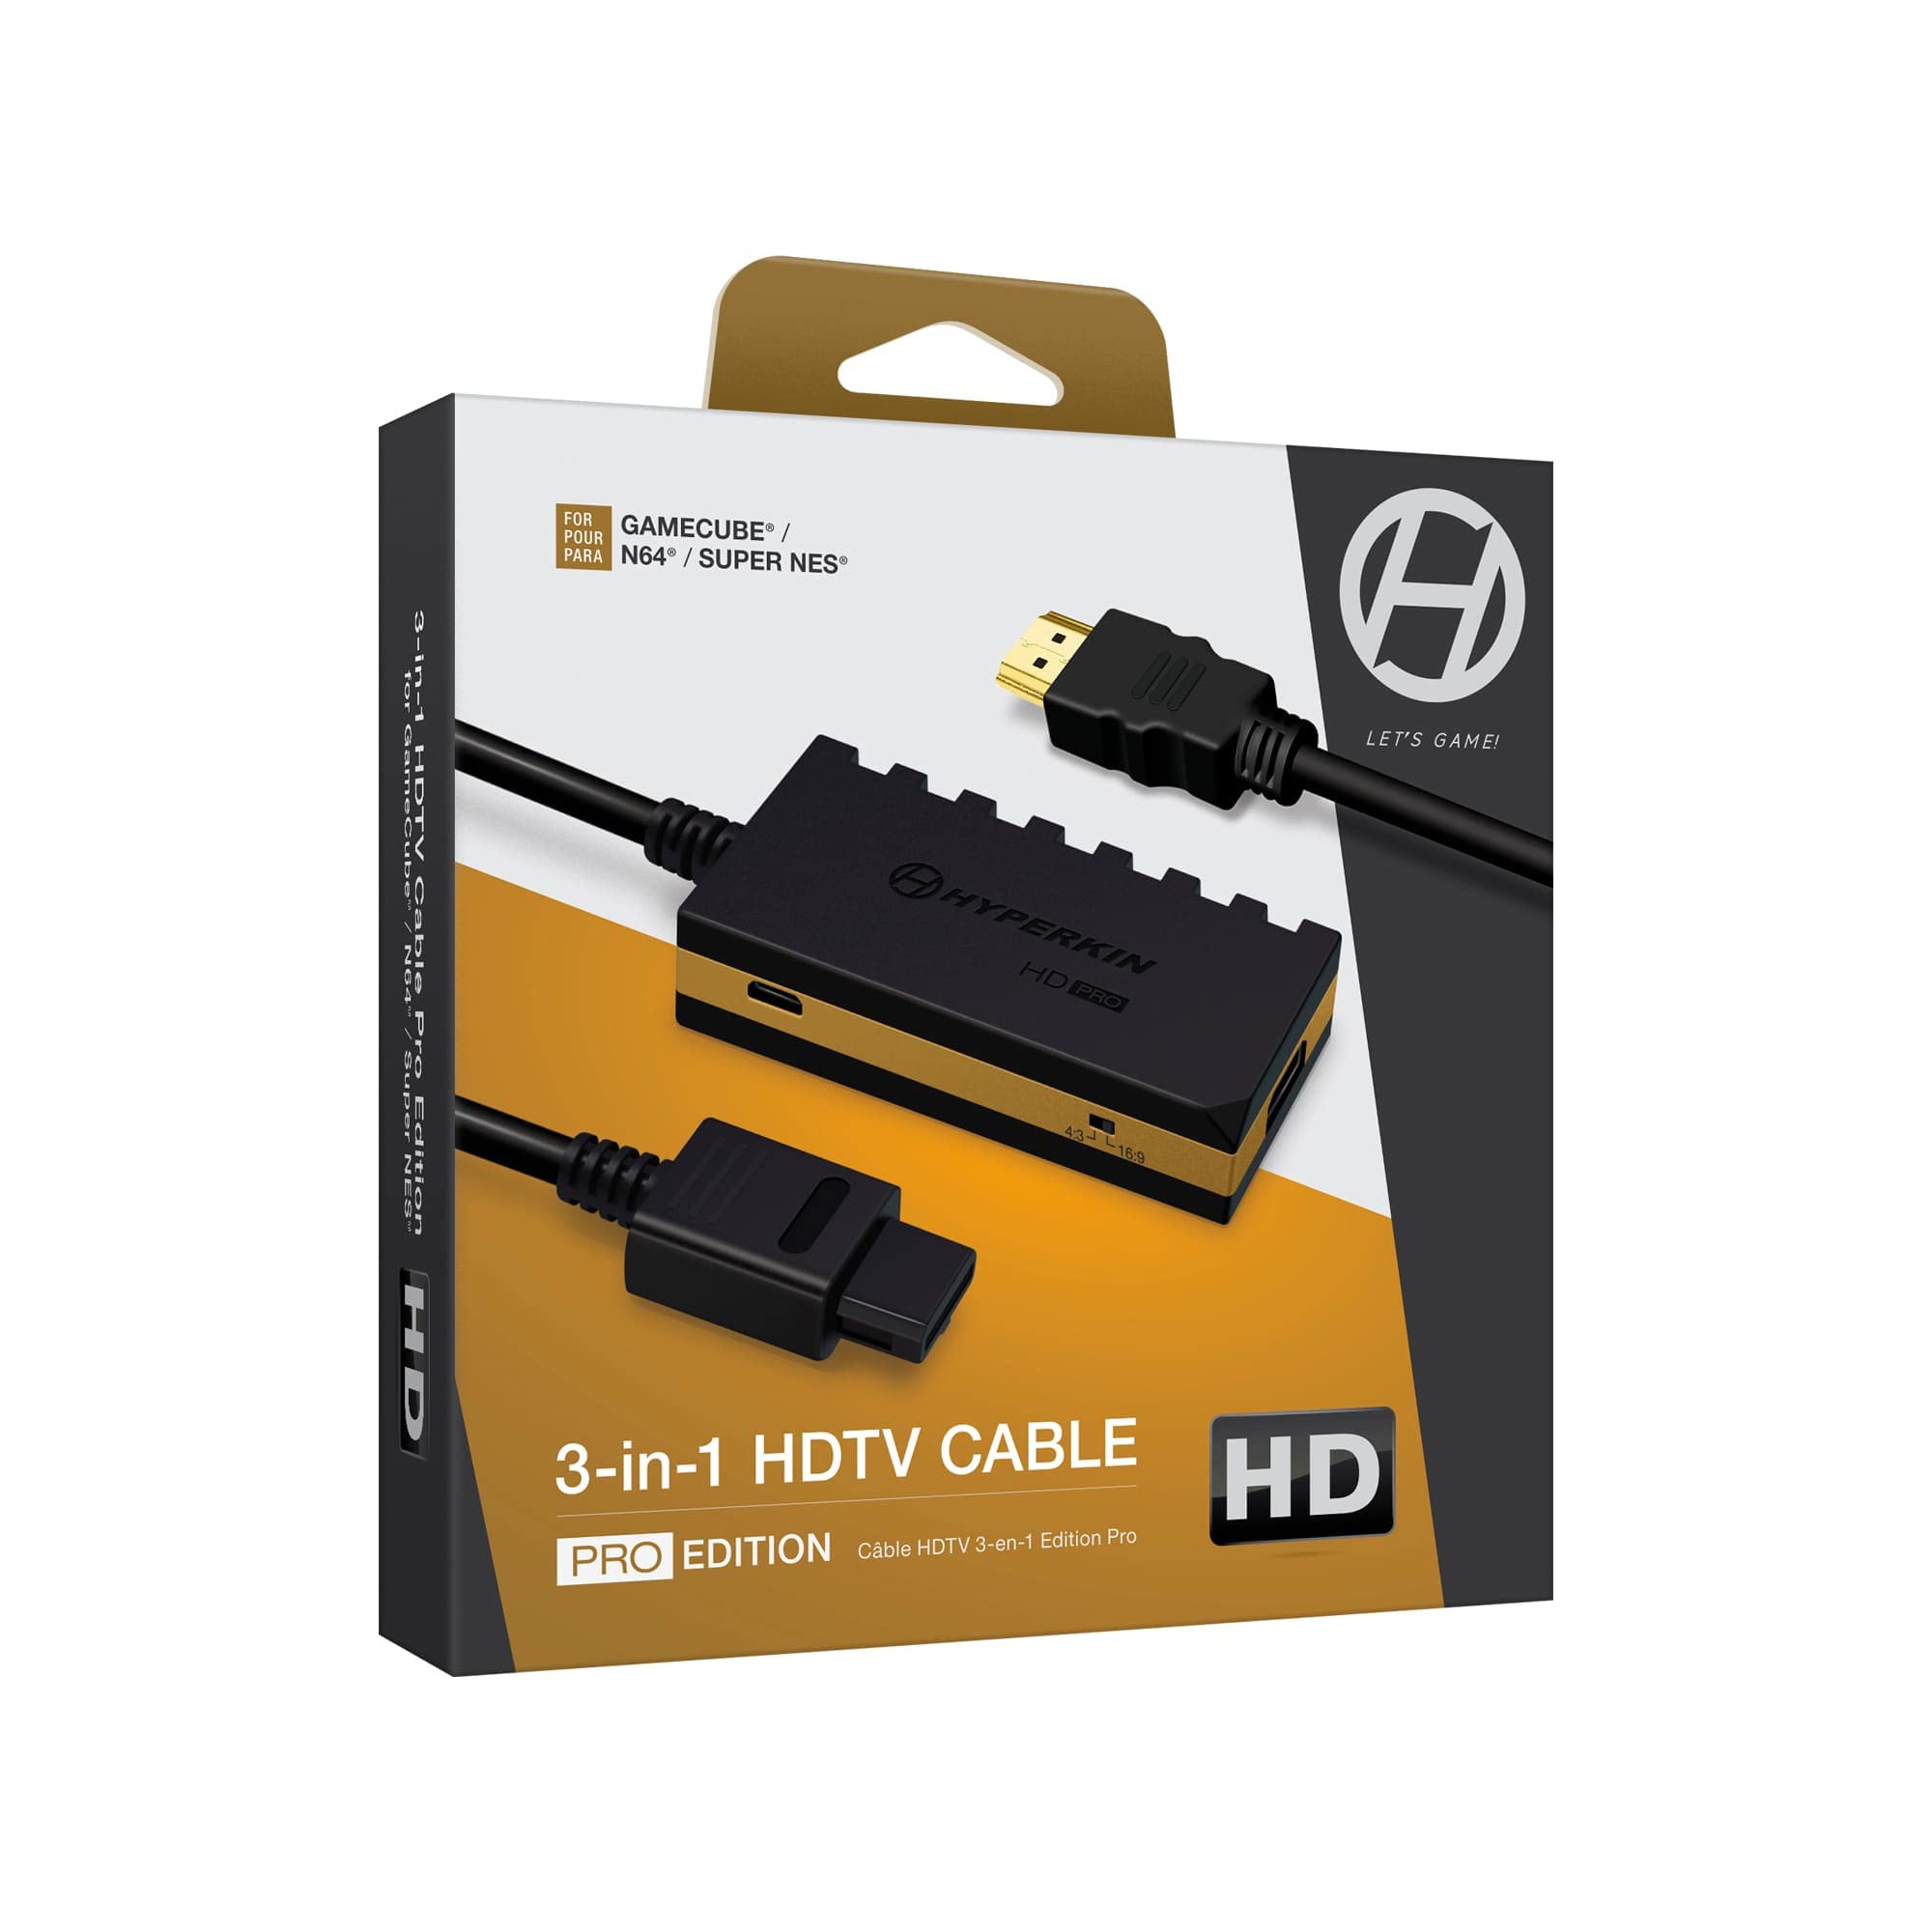 3-In-1 720p HDTV Cable HD Pro Edition W/ 4 Visual Modes, No Additional Power Supply For GameCube®/ N64®/ Super NES® - Hyperkin